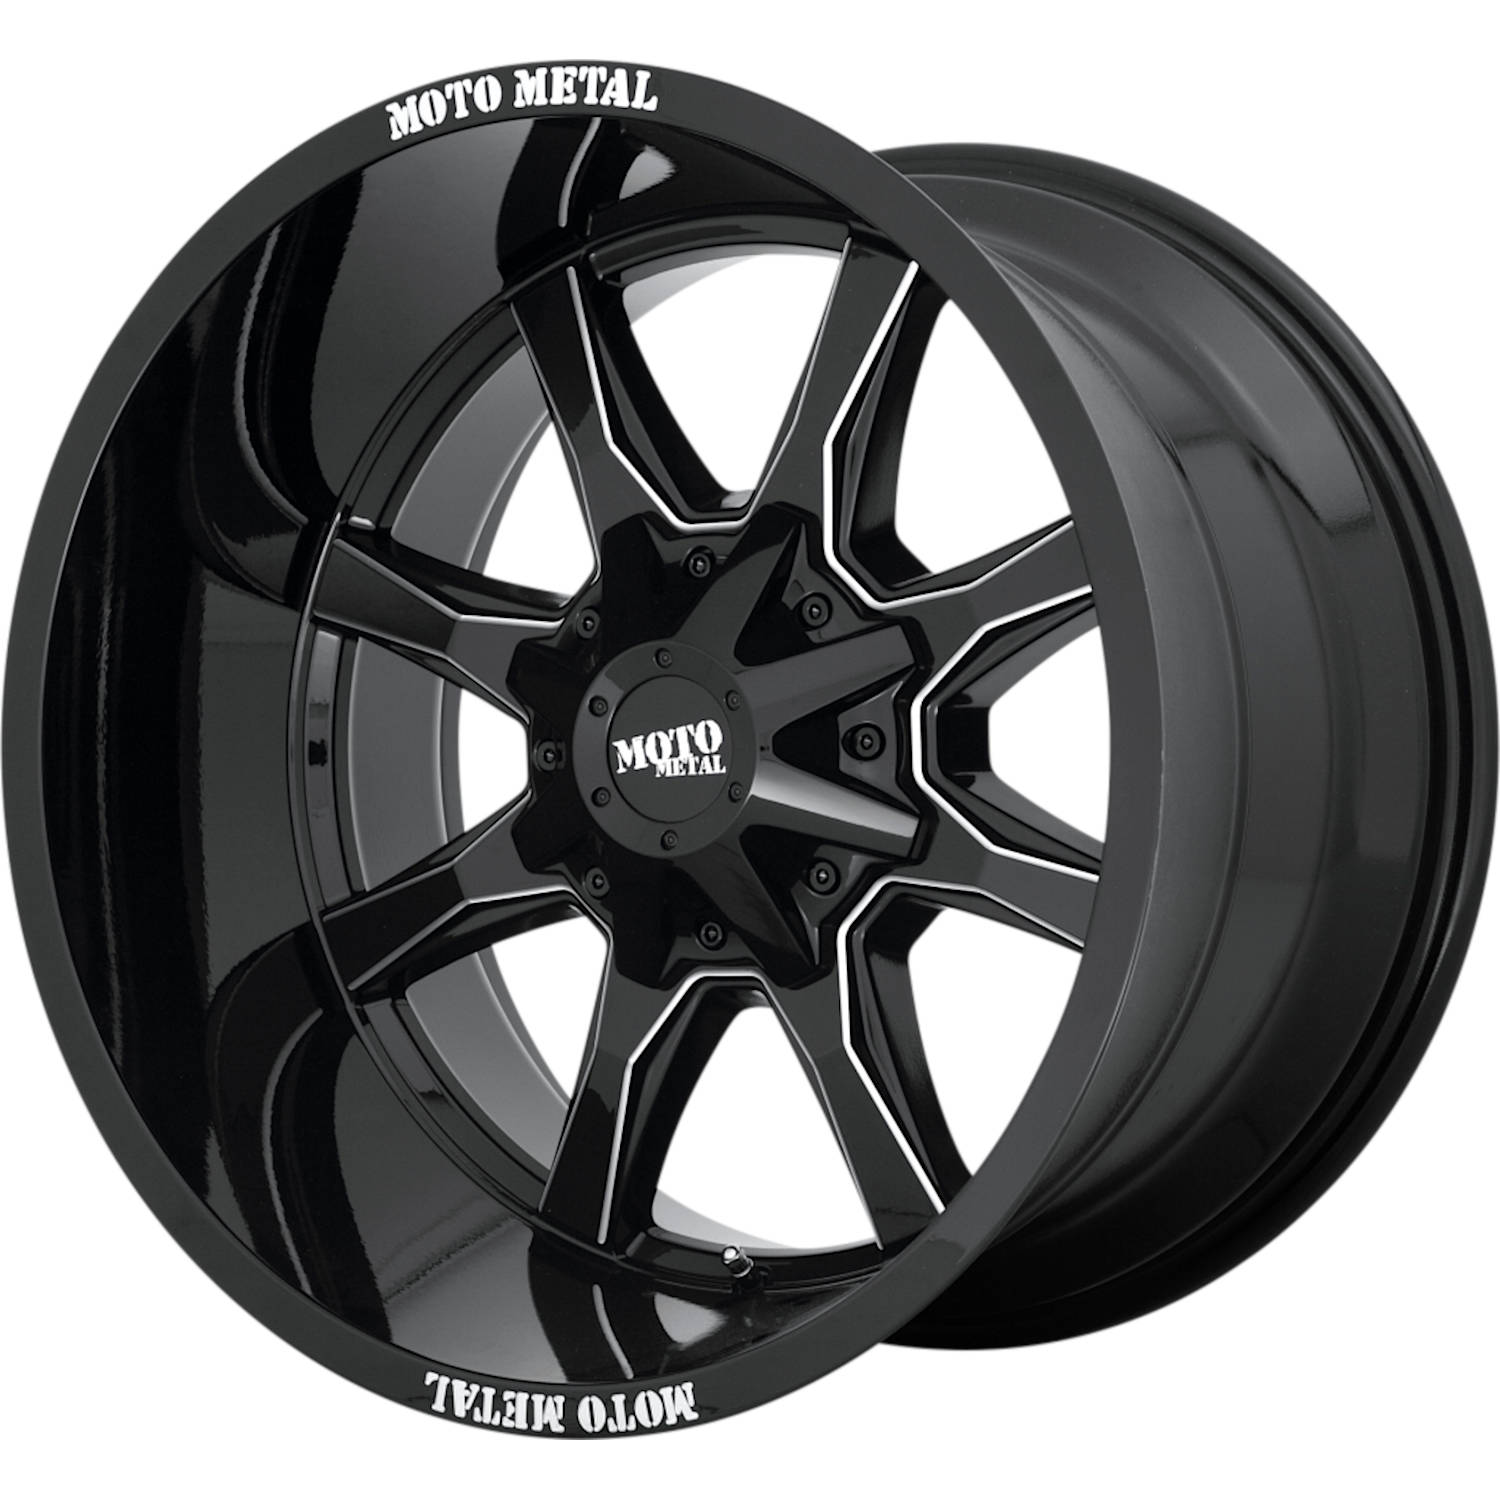 Moto Metal MO970 16x8 0 6x135/6x139.7 (6x5.5) Gloss Black with Milled Spoke Edges - Tires and Engine Performance